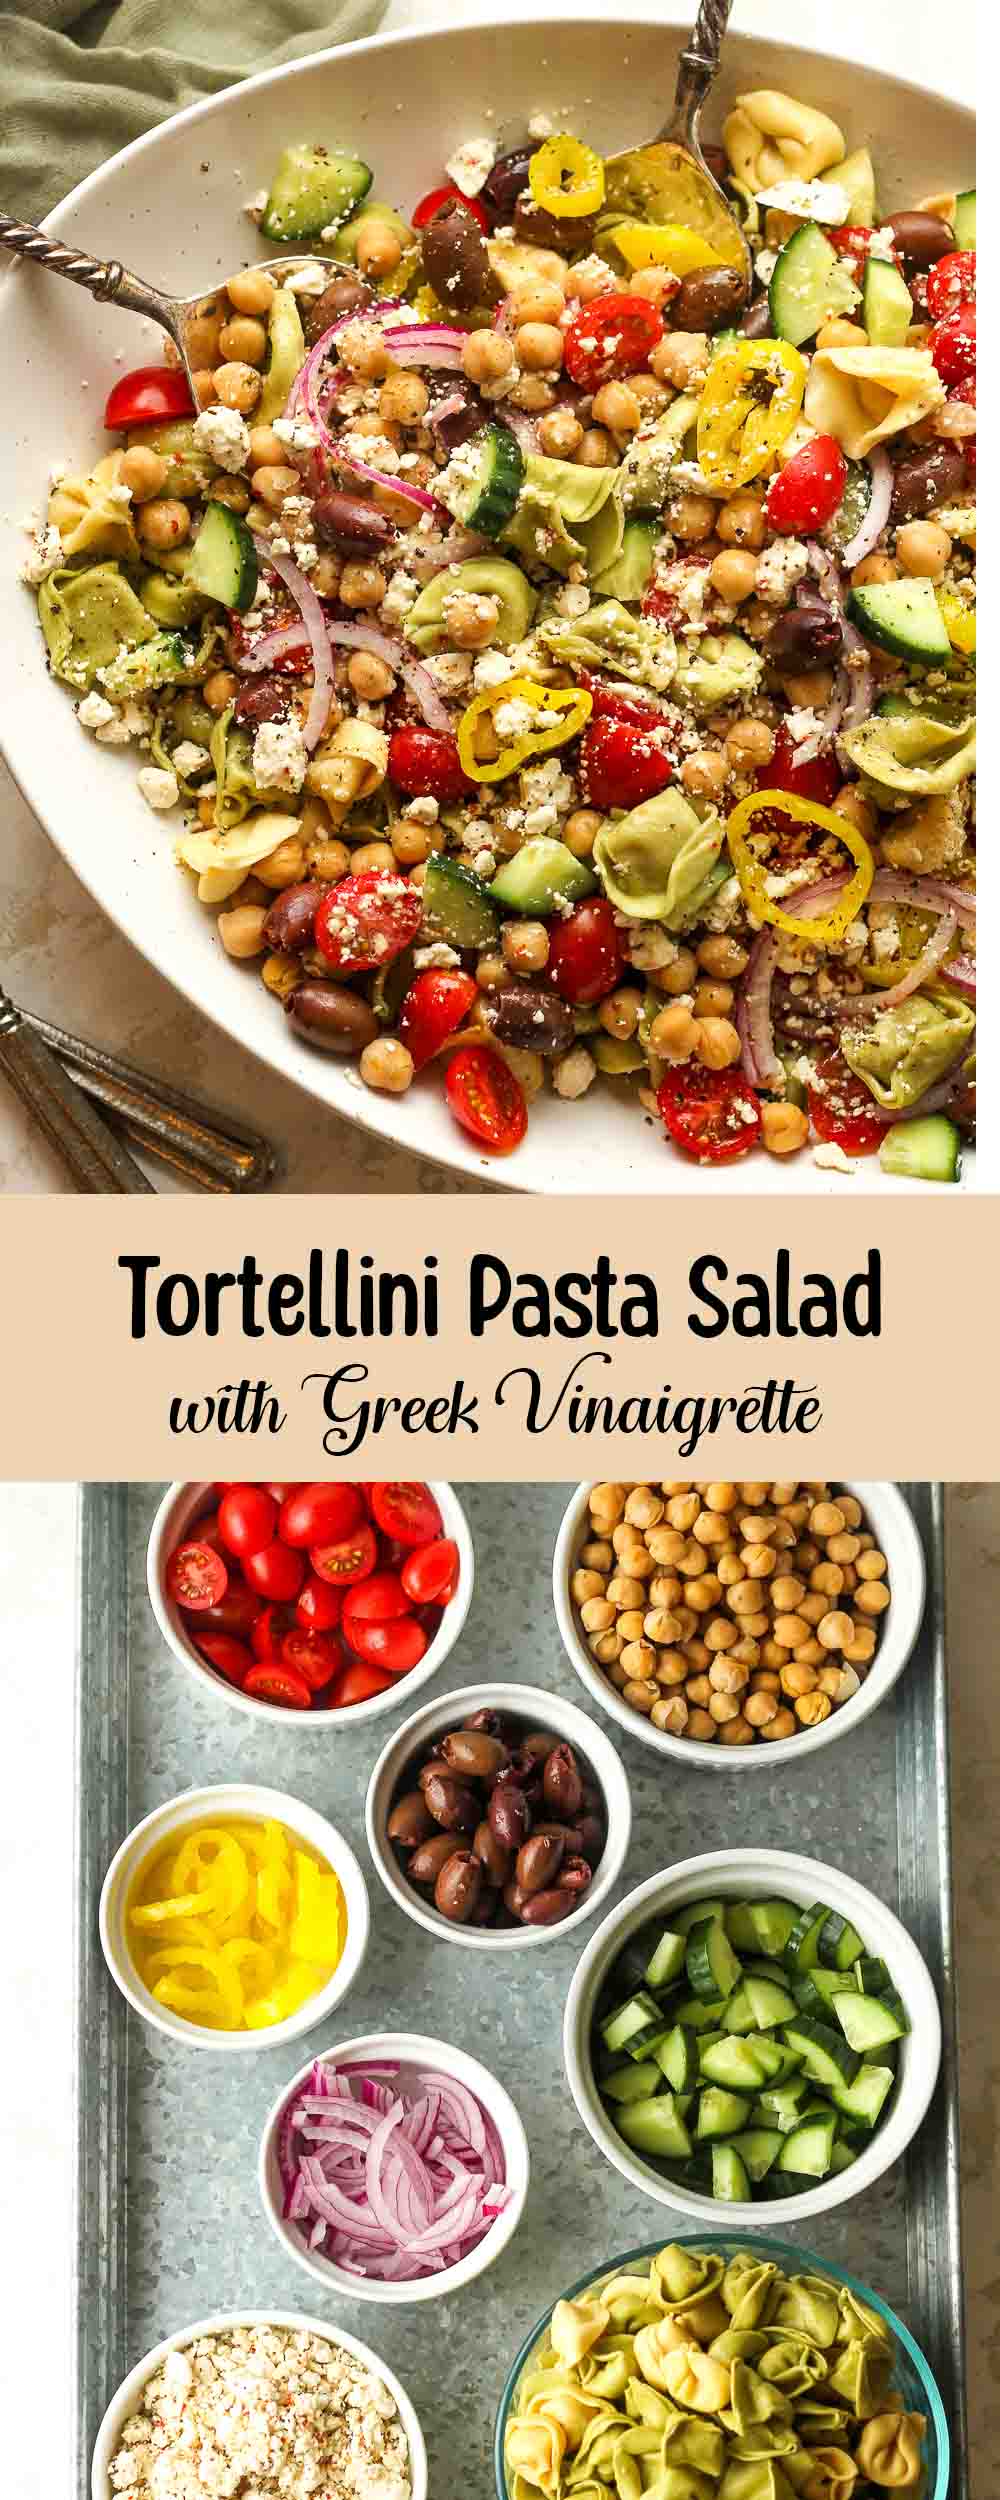 A collage of photos for Tortellini pasta salad with Greek vinaigrette.